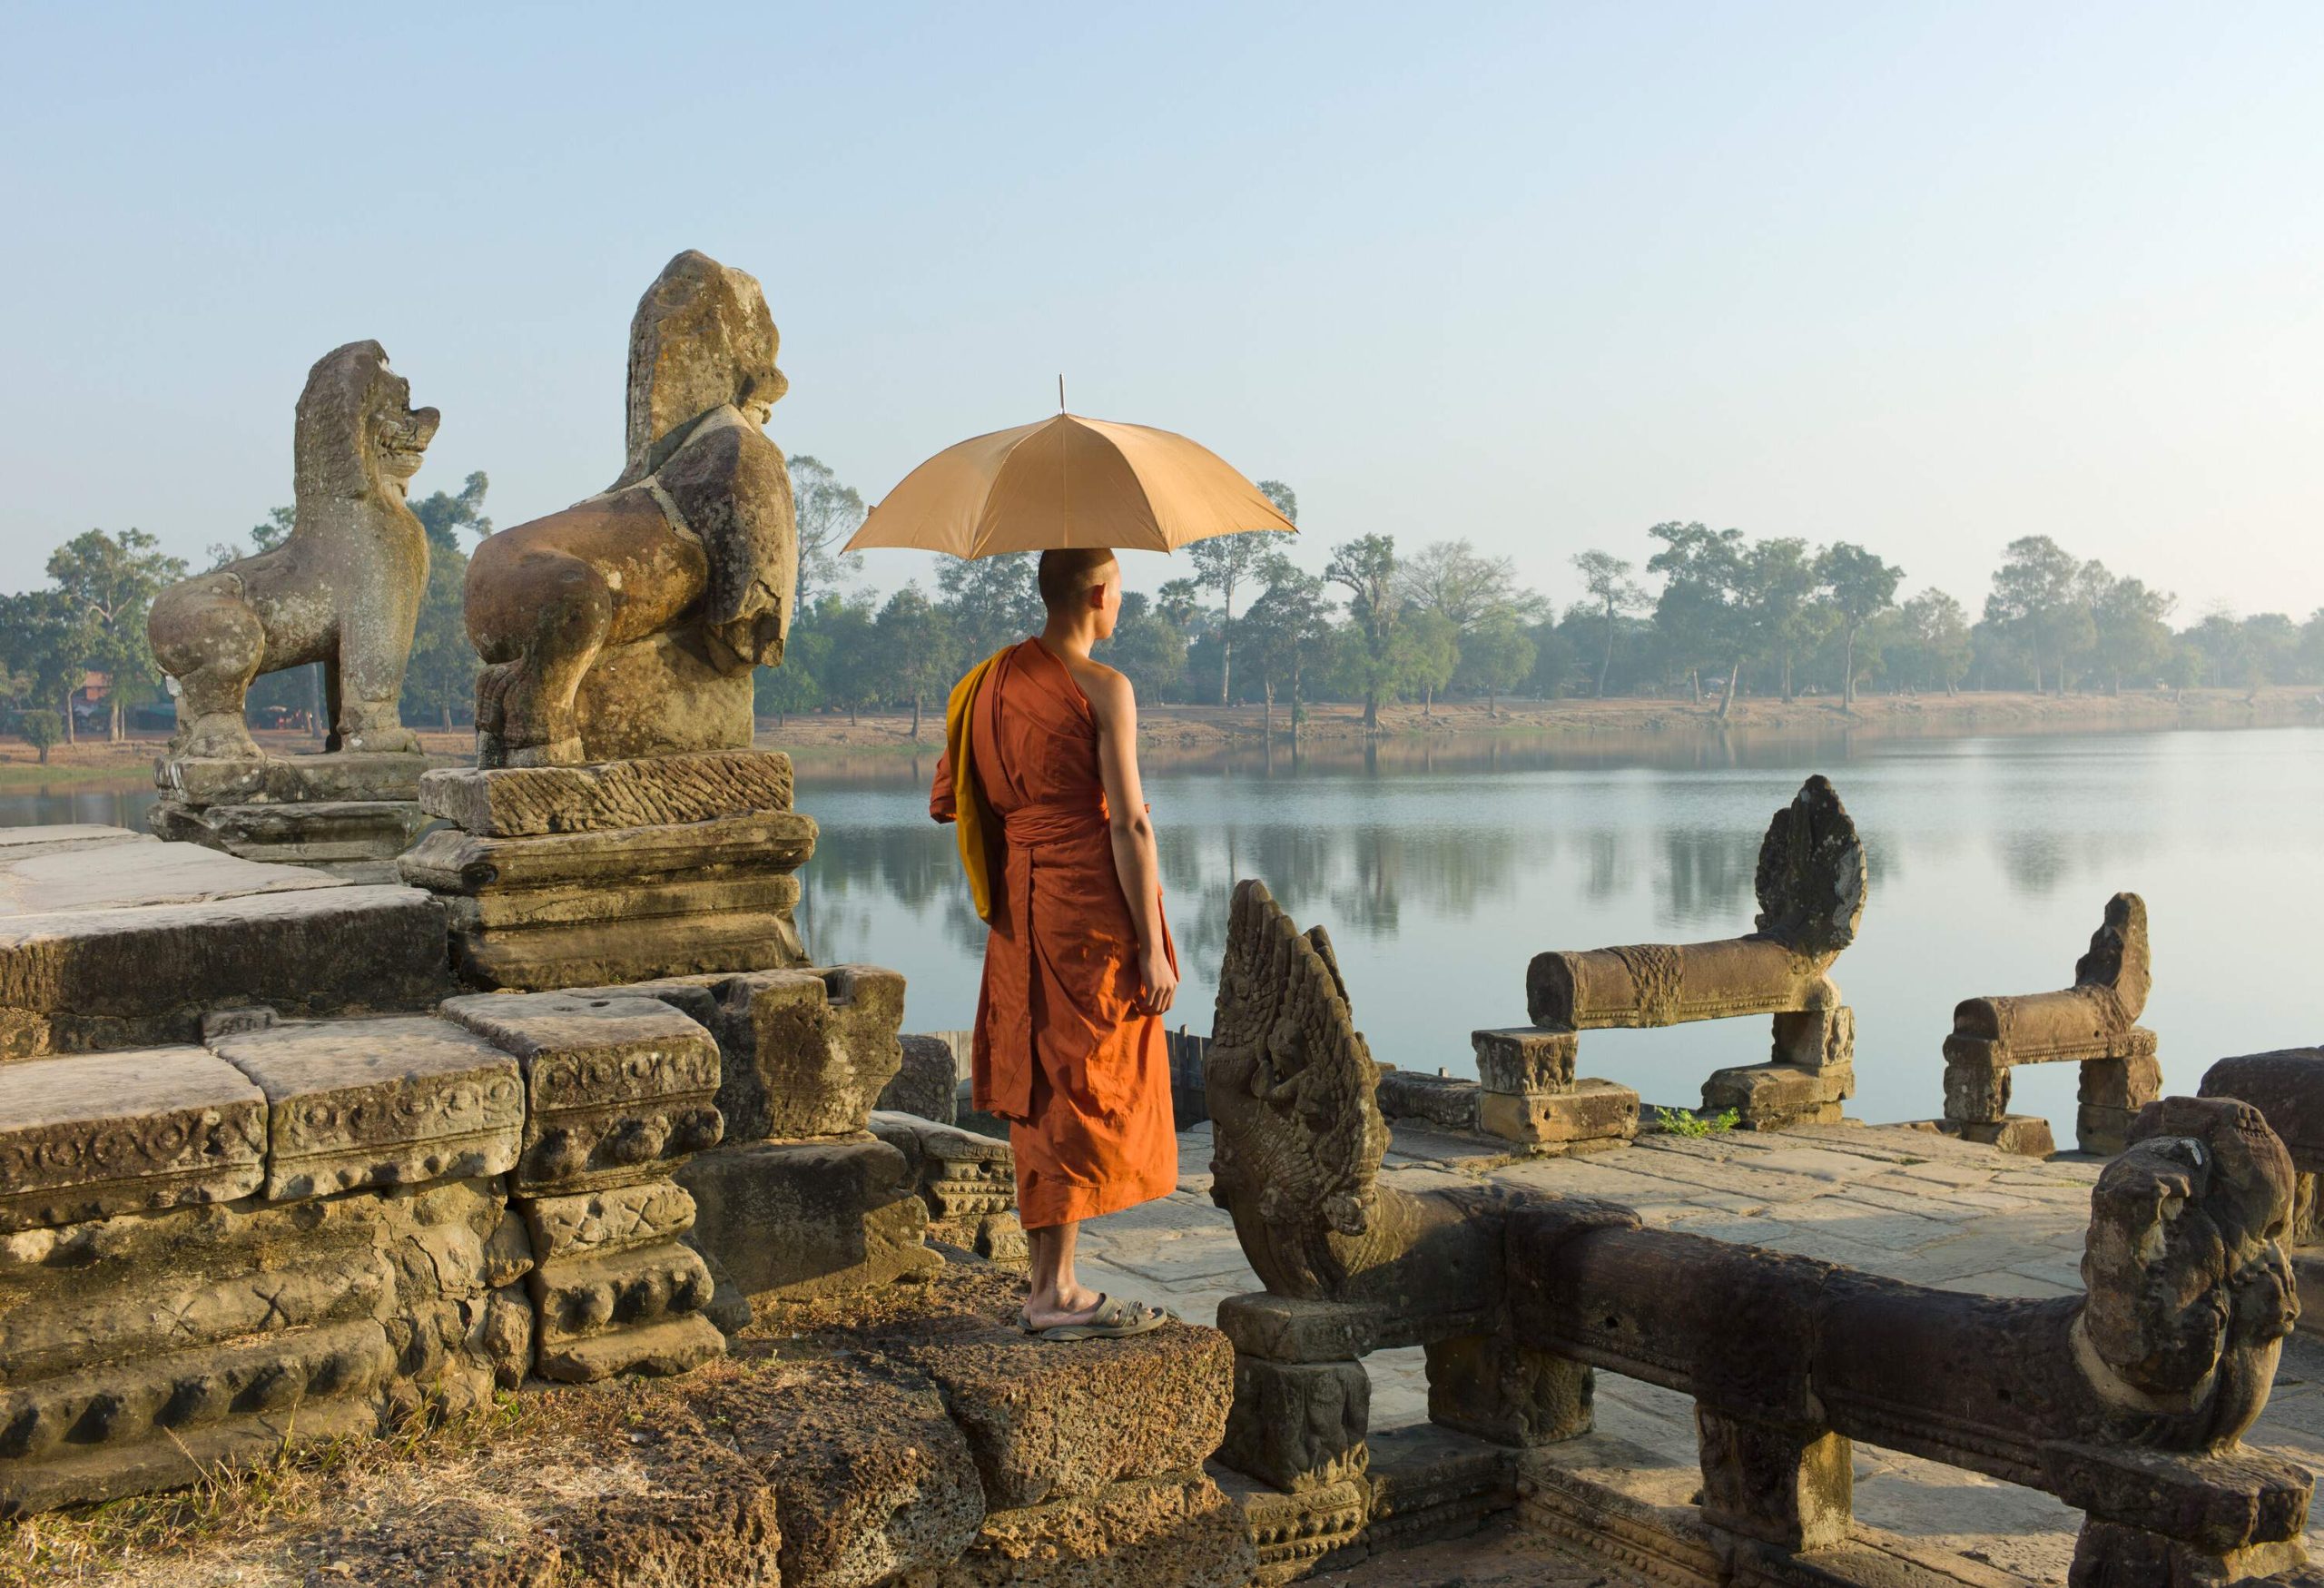 A monk stands next to the stone sculptures of the temple, gazing at the lake while holding an umbrella.